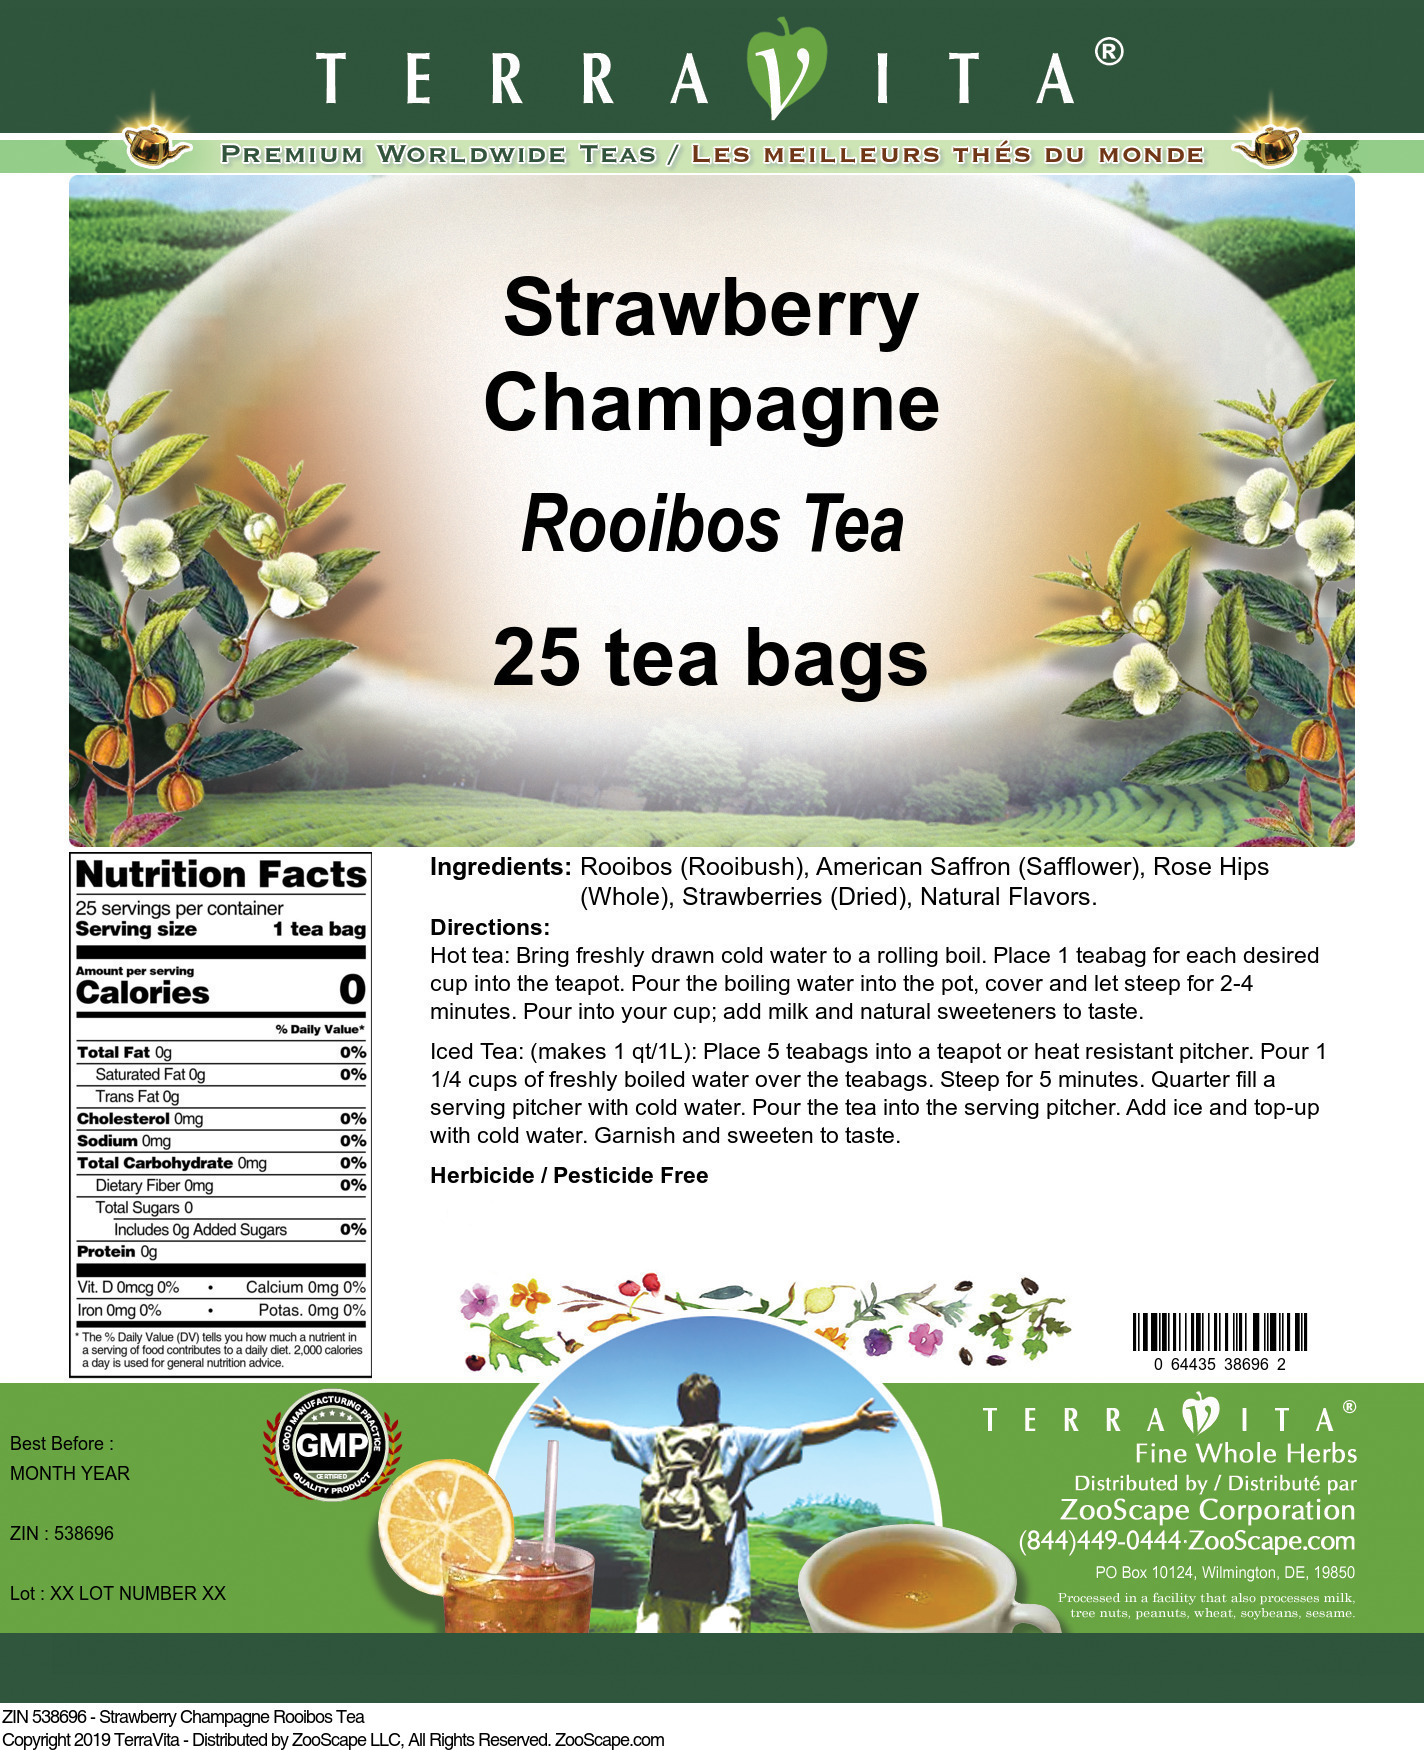 Strawberry Champagne Rooibos Tea - Label